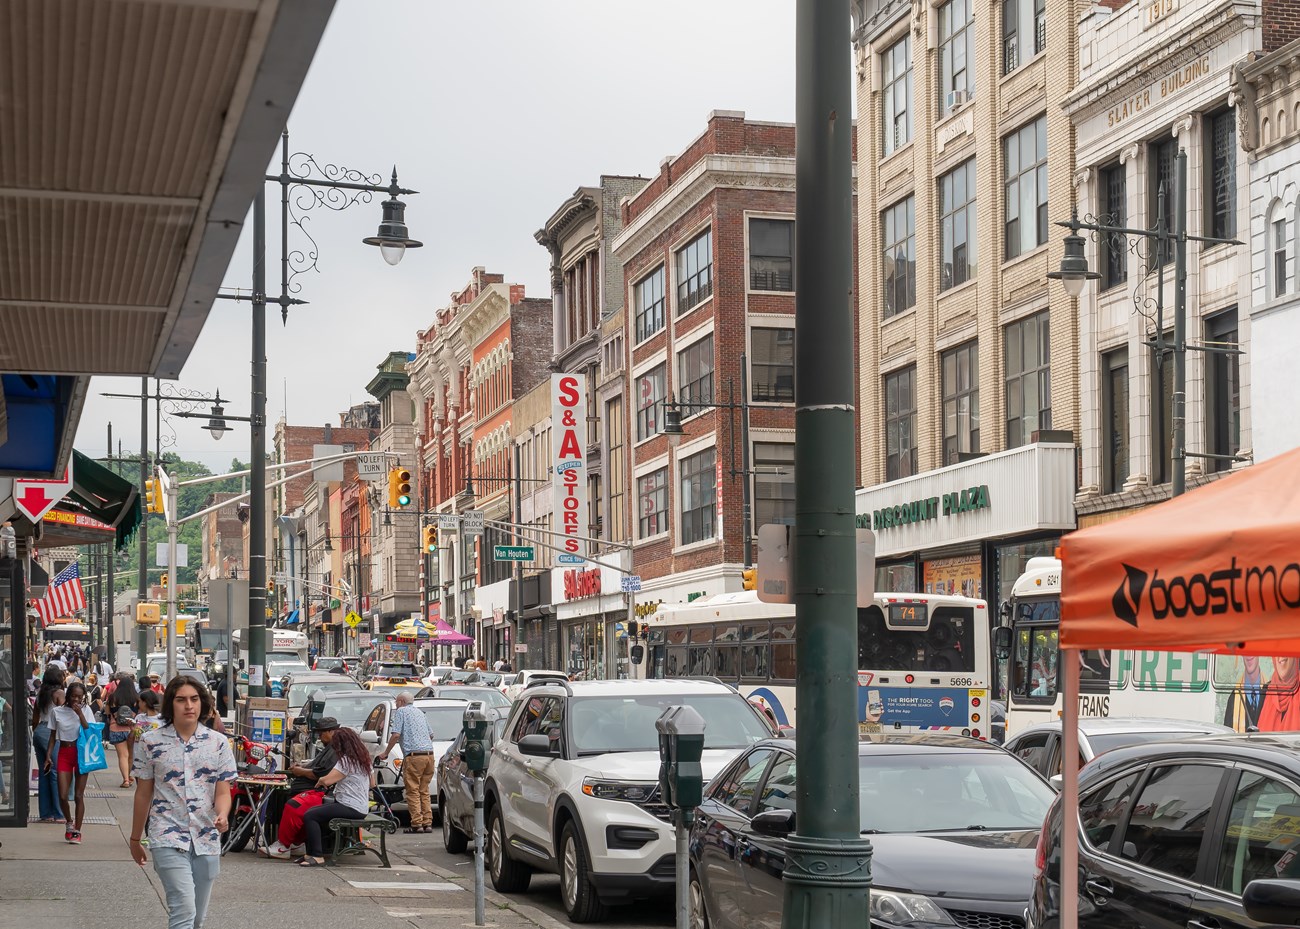 A busy downtown Paterson NJ street, crowded road lined with shops, restaurants, & pedestrians